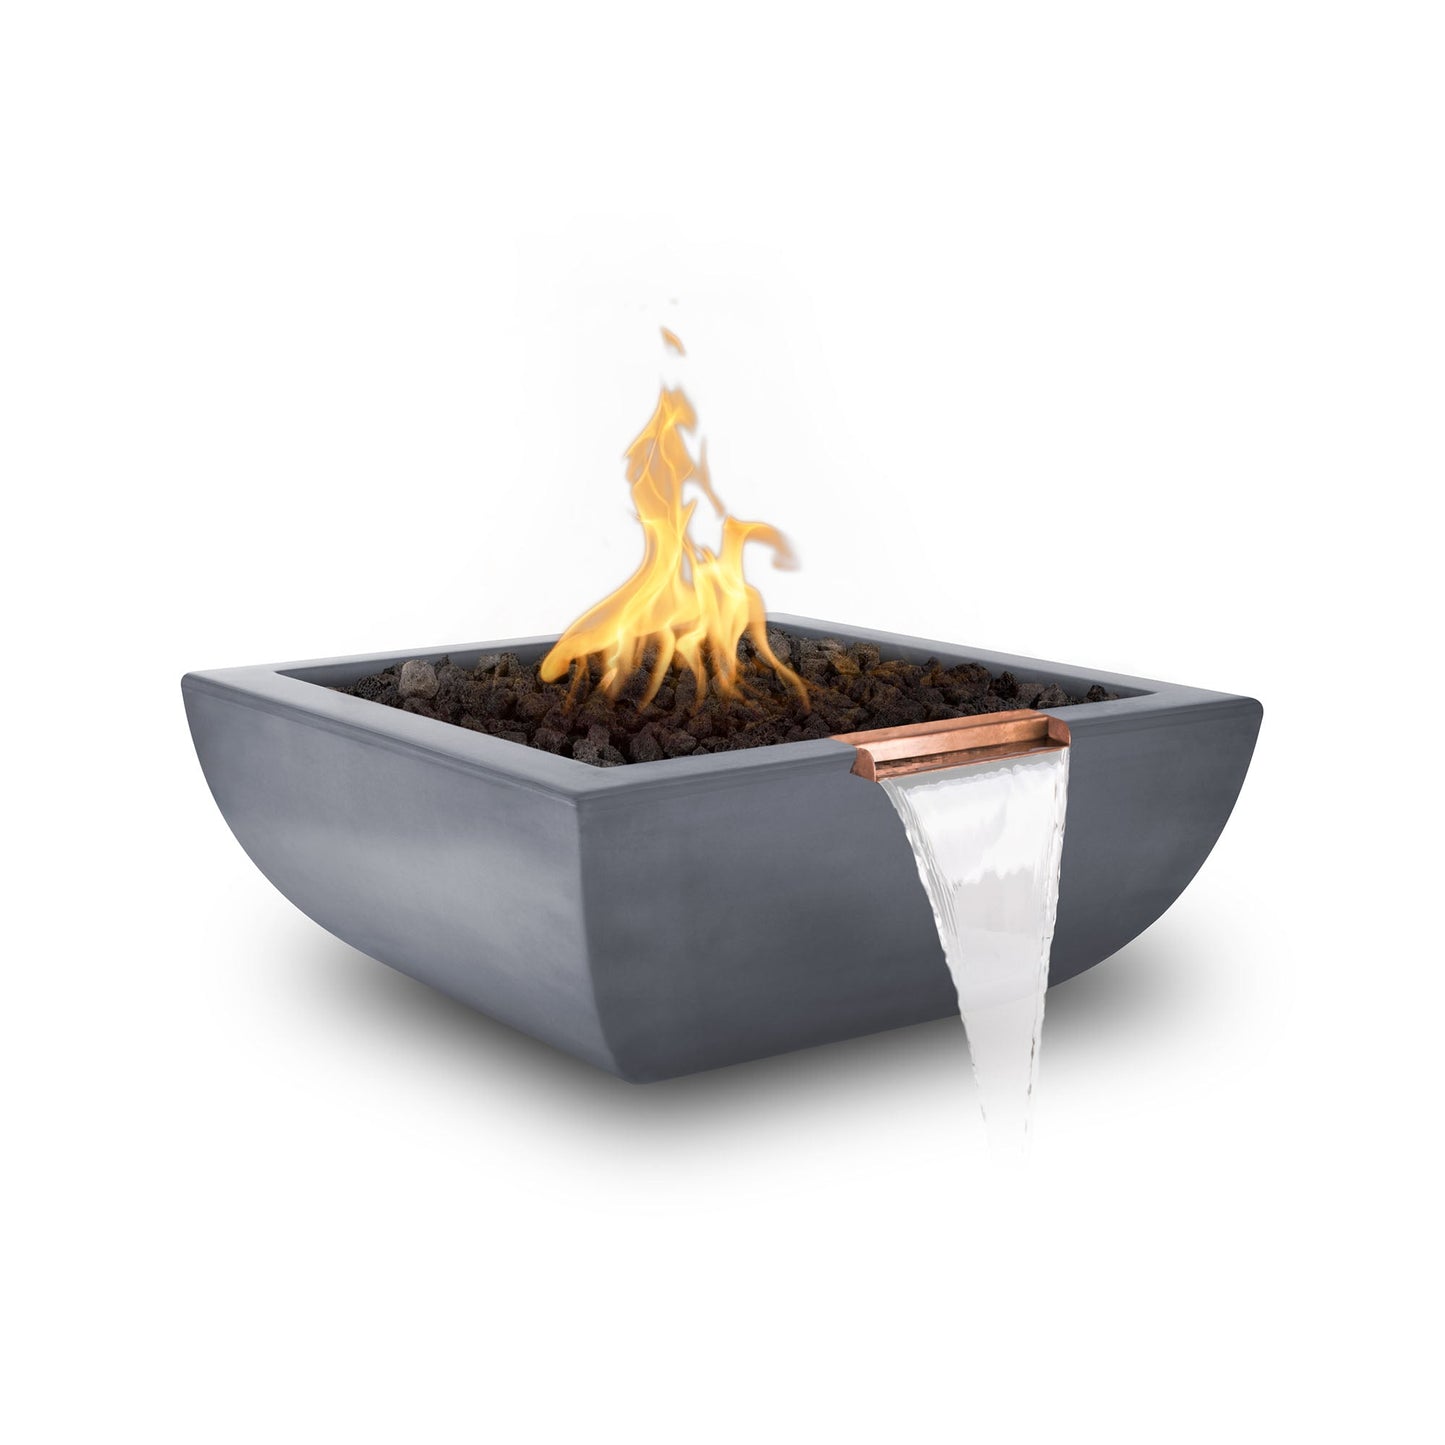 The Outdoor Plus Square Avalon 24" Rustic Coffee GFRC Concrete Liquid Propane Fire & Water Bowl with Match Lit with Flame Sense Ignition